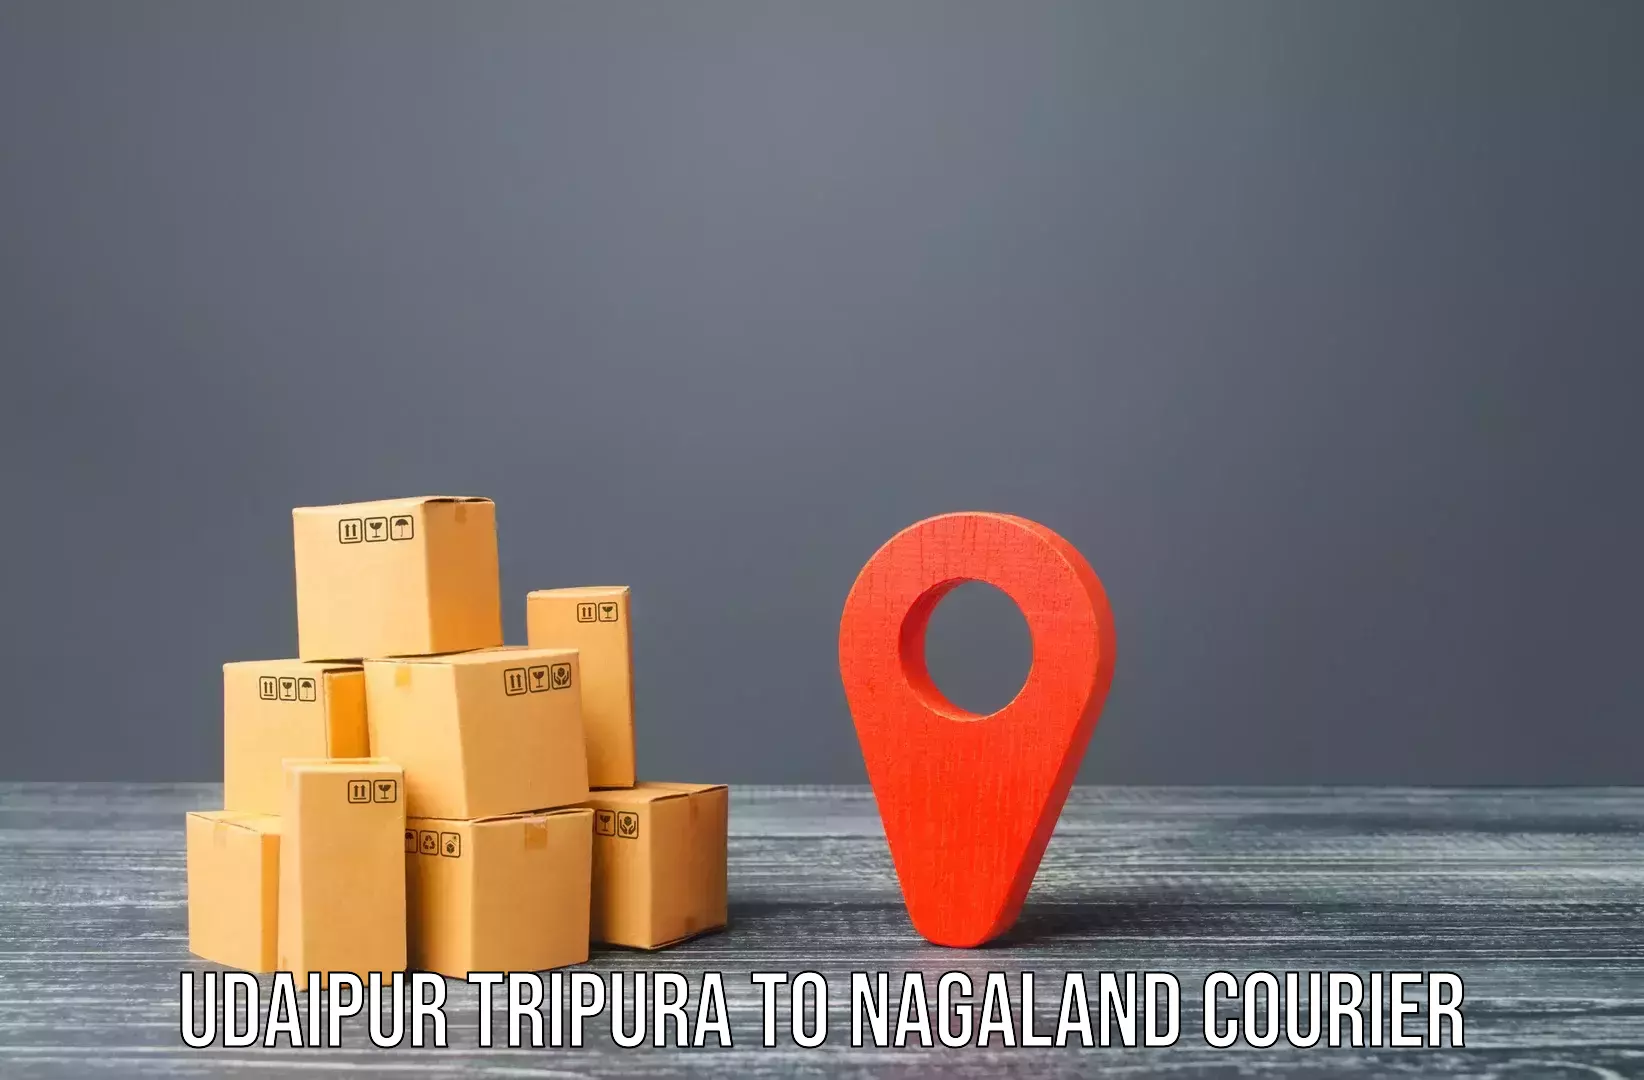 Quality relocation assistance in Udaipur Tripura to Kohima